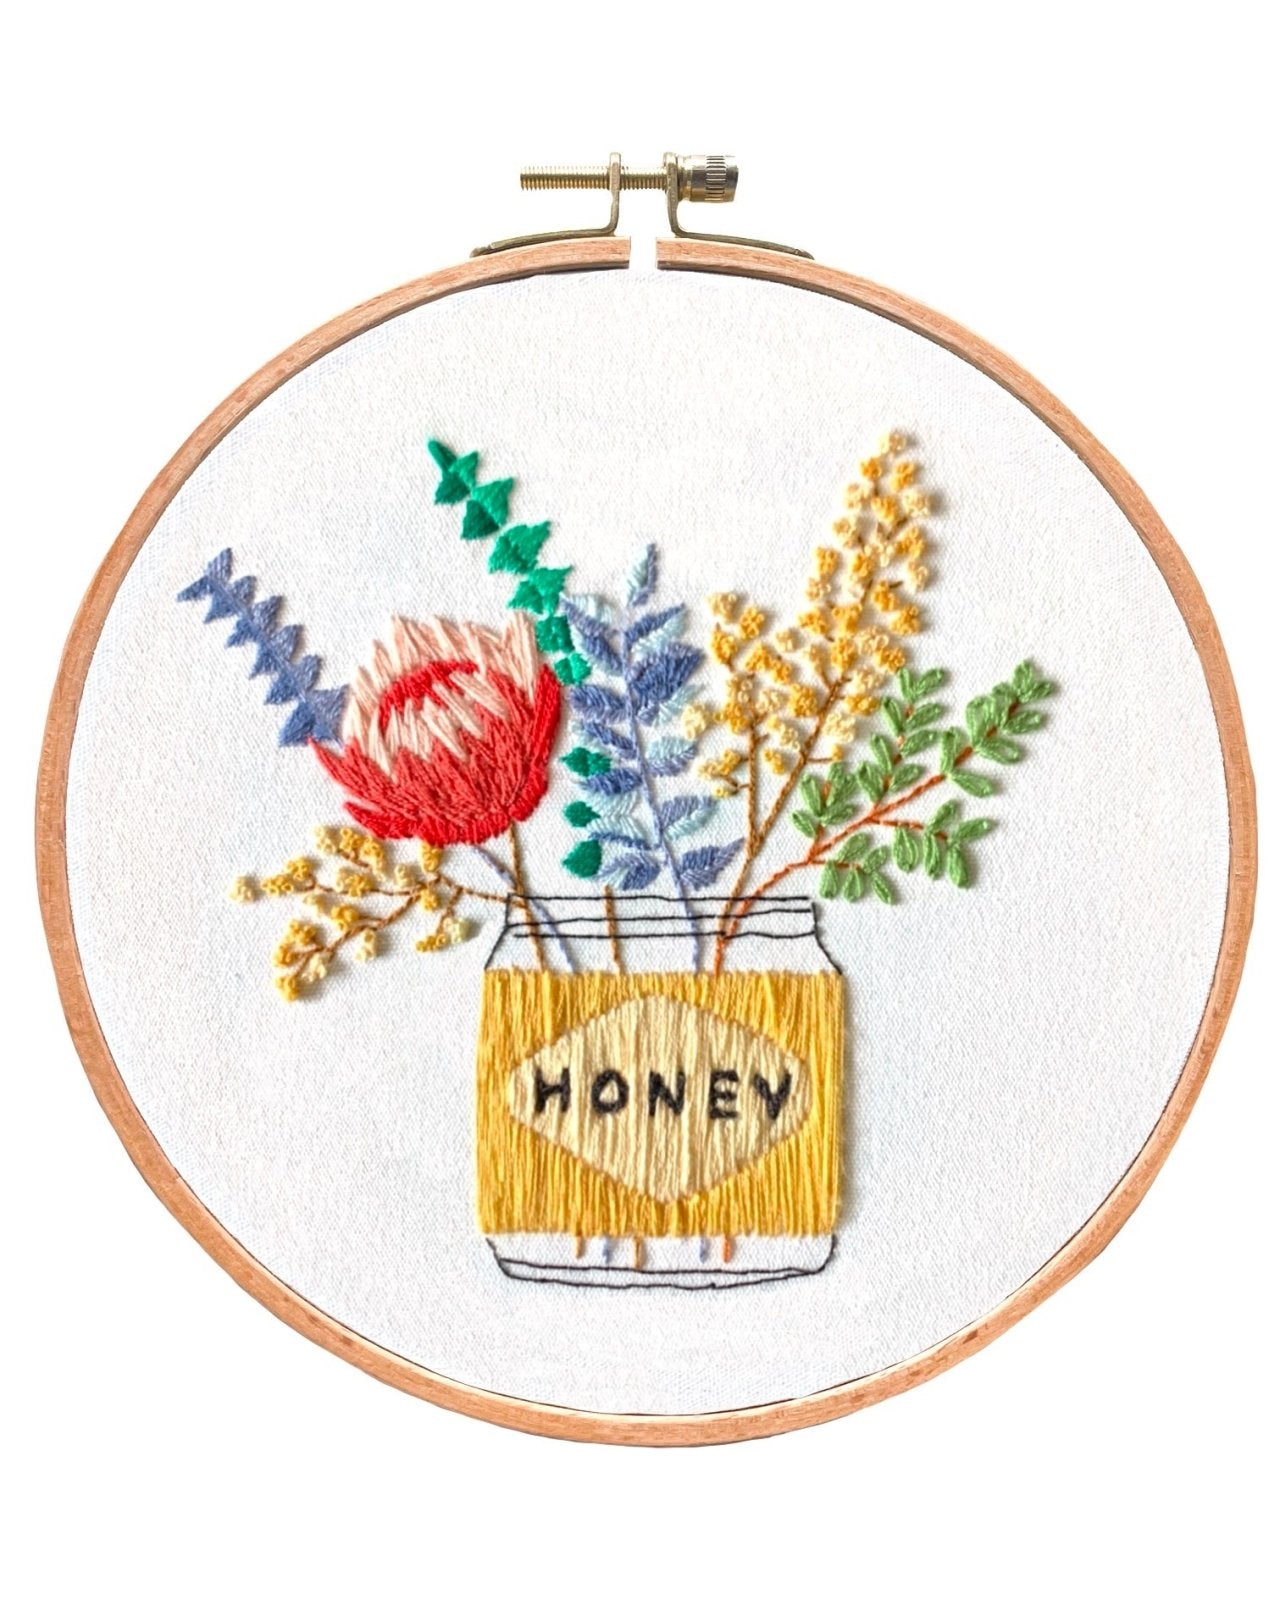 Aussie Breakfast Embroidery Kit - Stitched Up Kits. Yellow Honey Jar with Australian Natives sitting in it, all hand embroidered